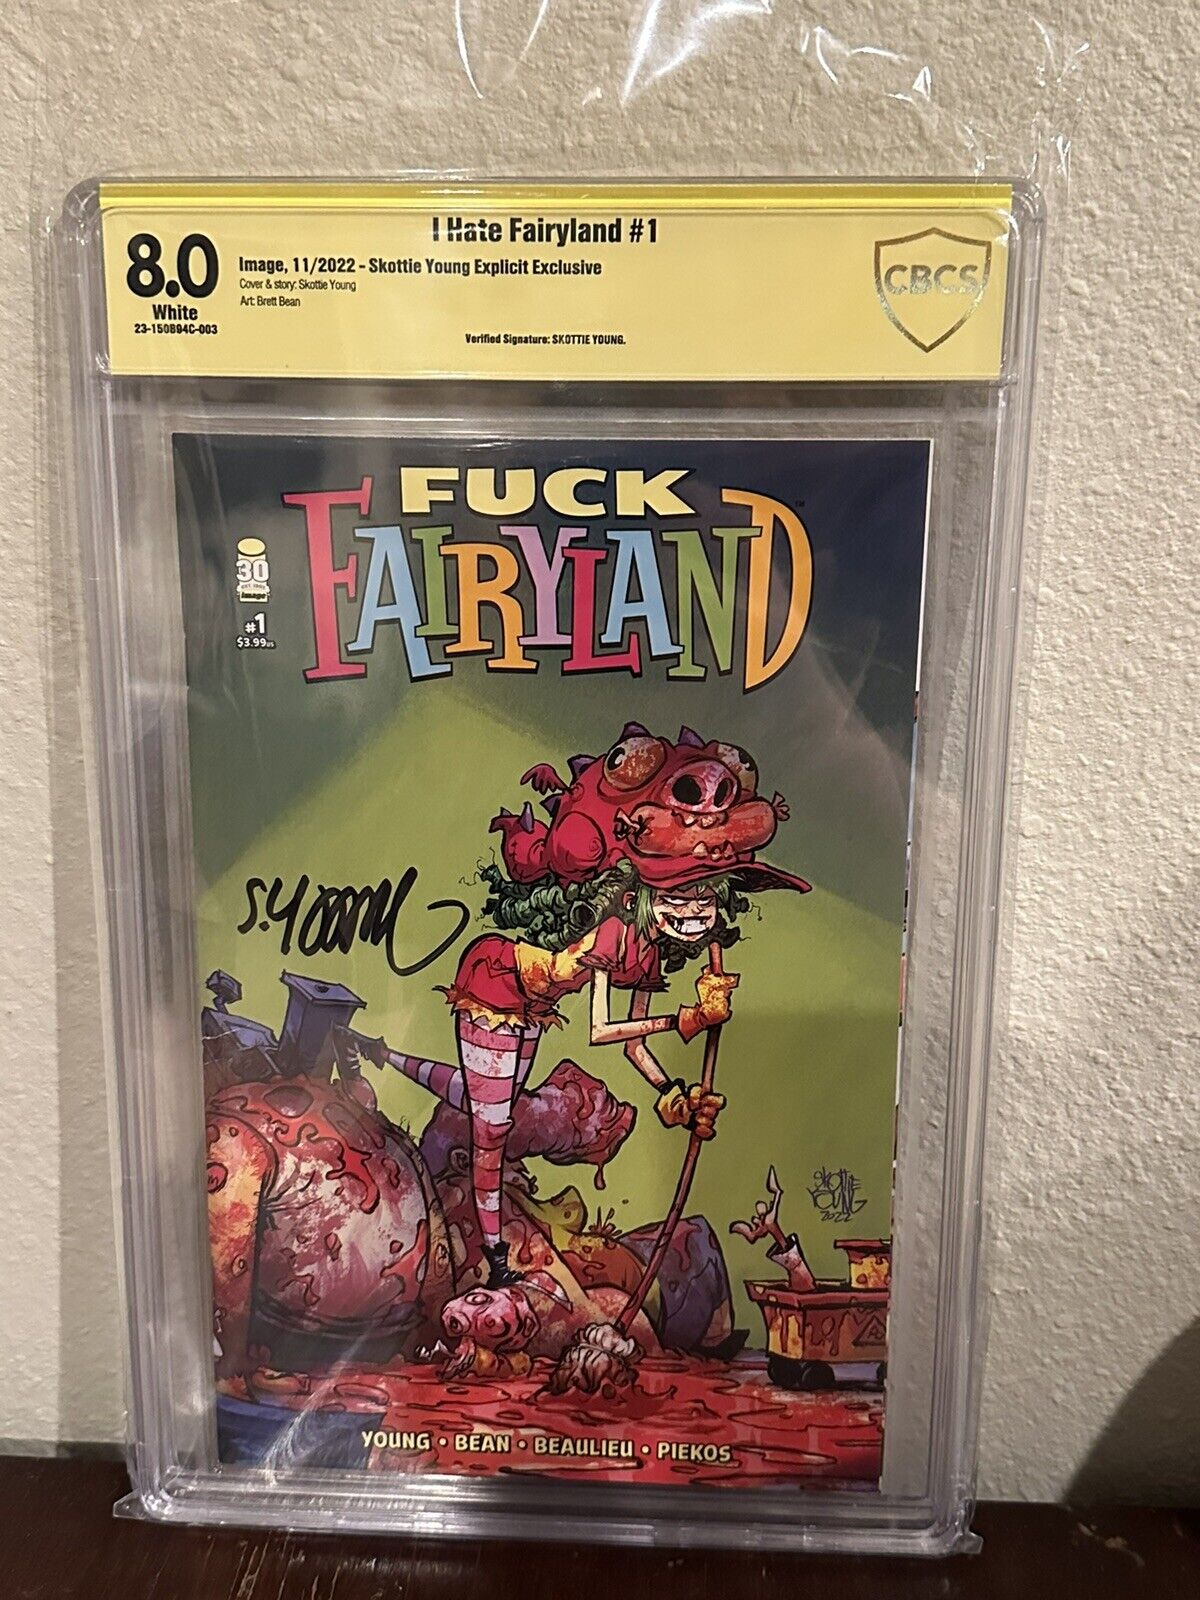 I Hate Fairyland Special #1 CBCS 8.0 Uncensored Signed Skottie Young Image 2022